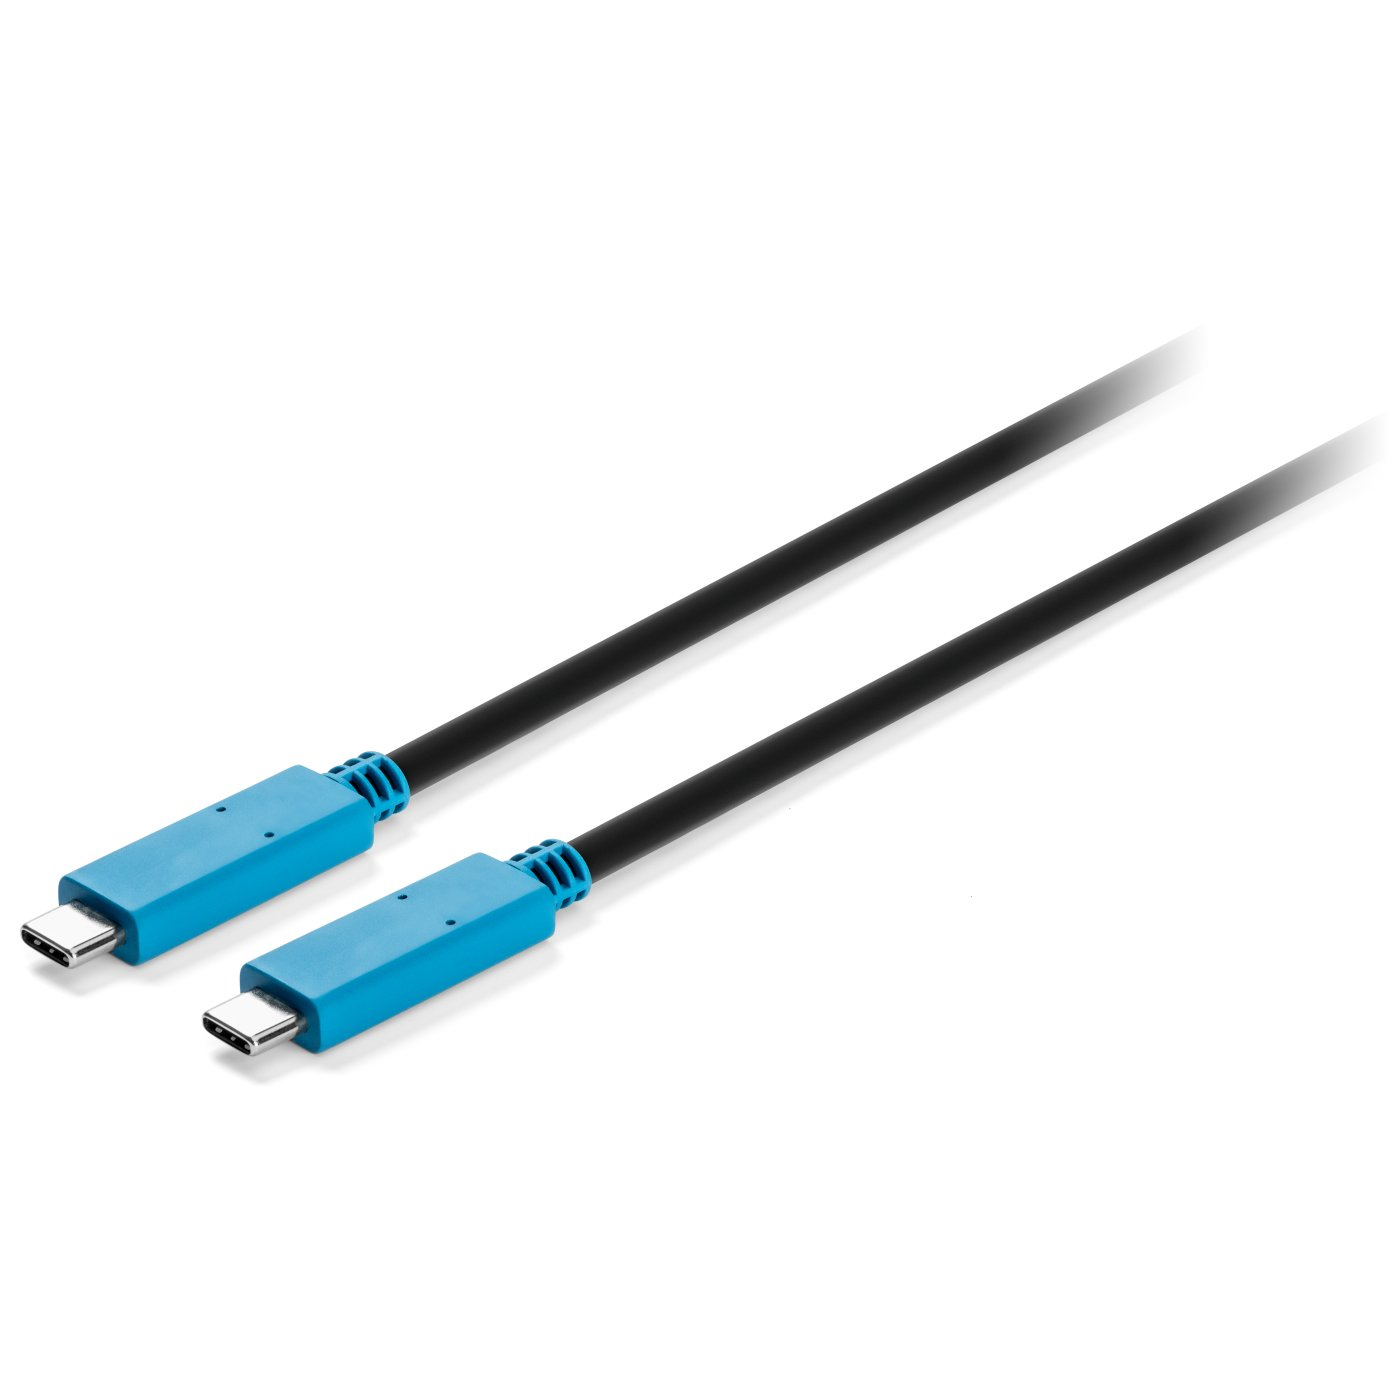 1-METER (3.1 FEET) CABLE THAT CAN CARRY 4K VIDEO, DATA AND UP TO 60W OF CHARGING